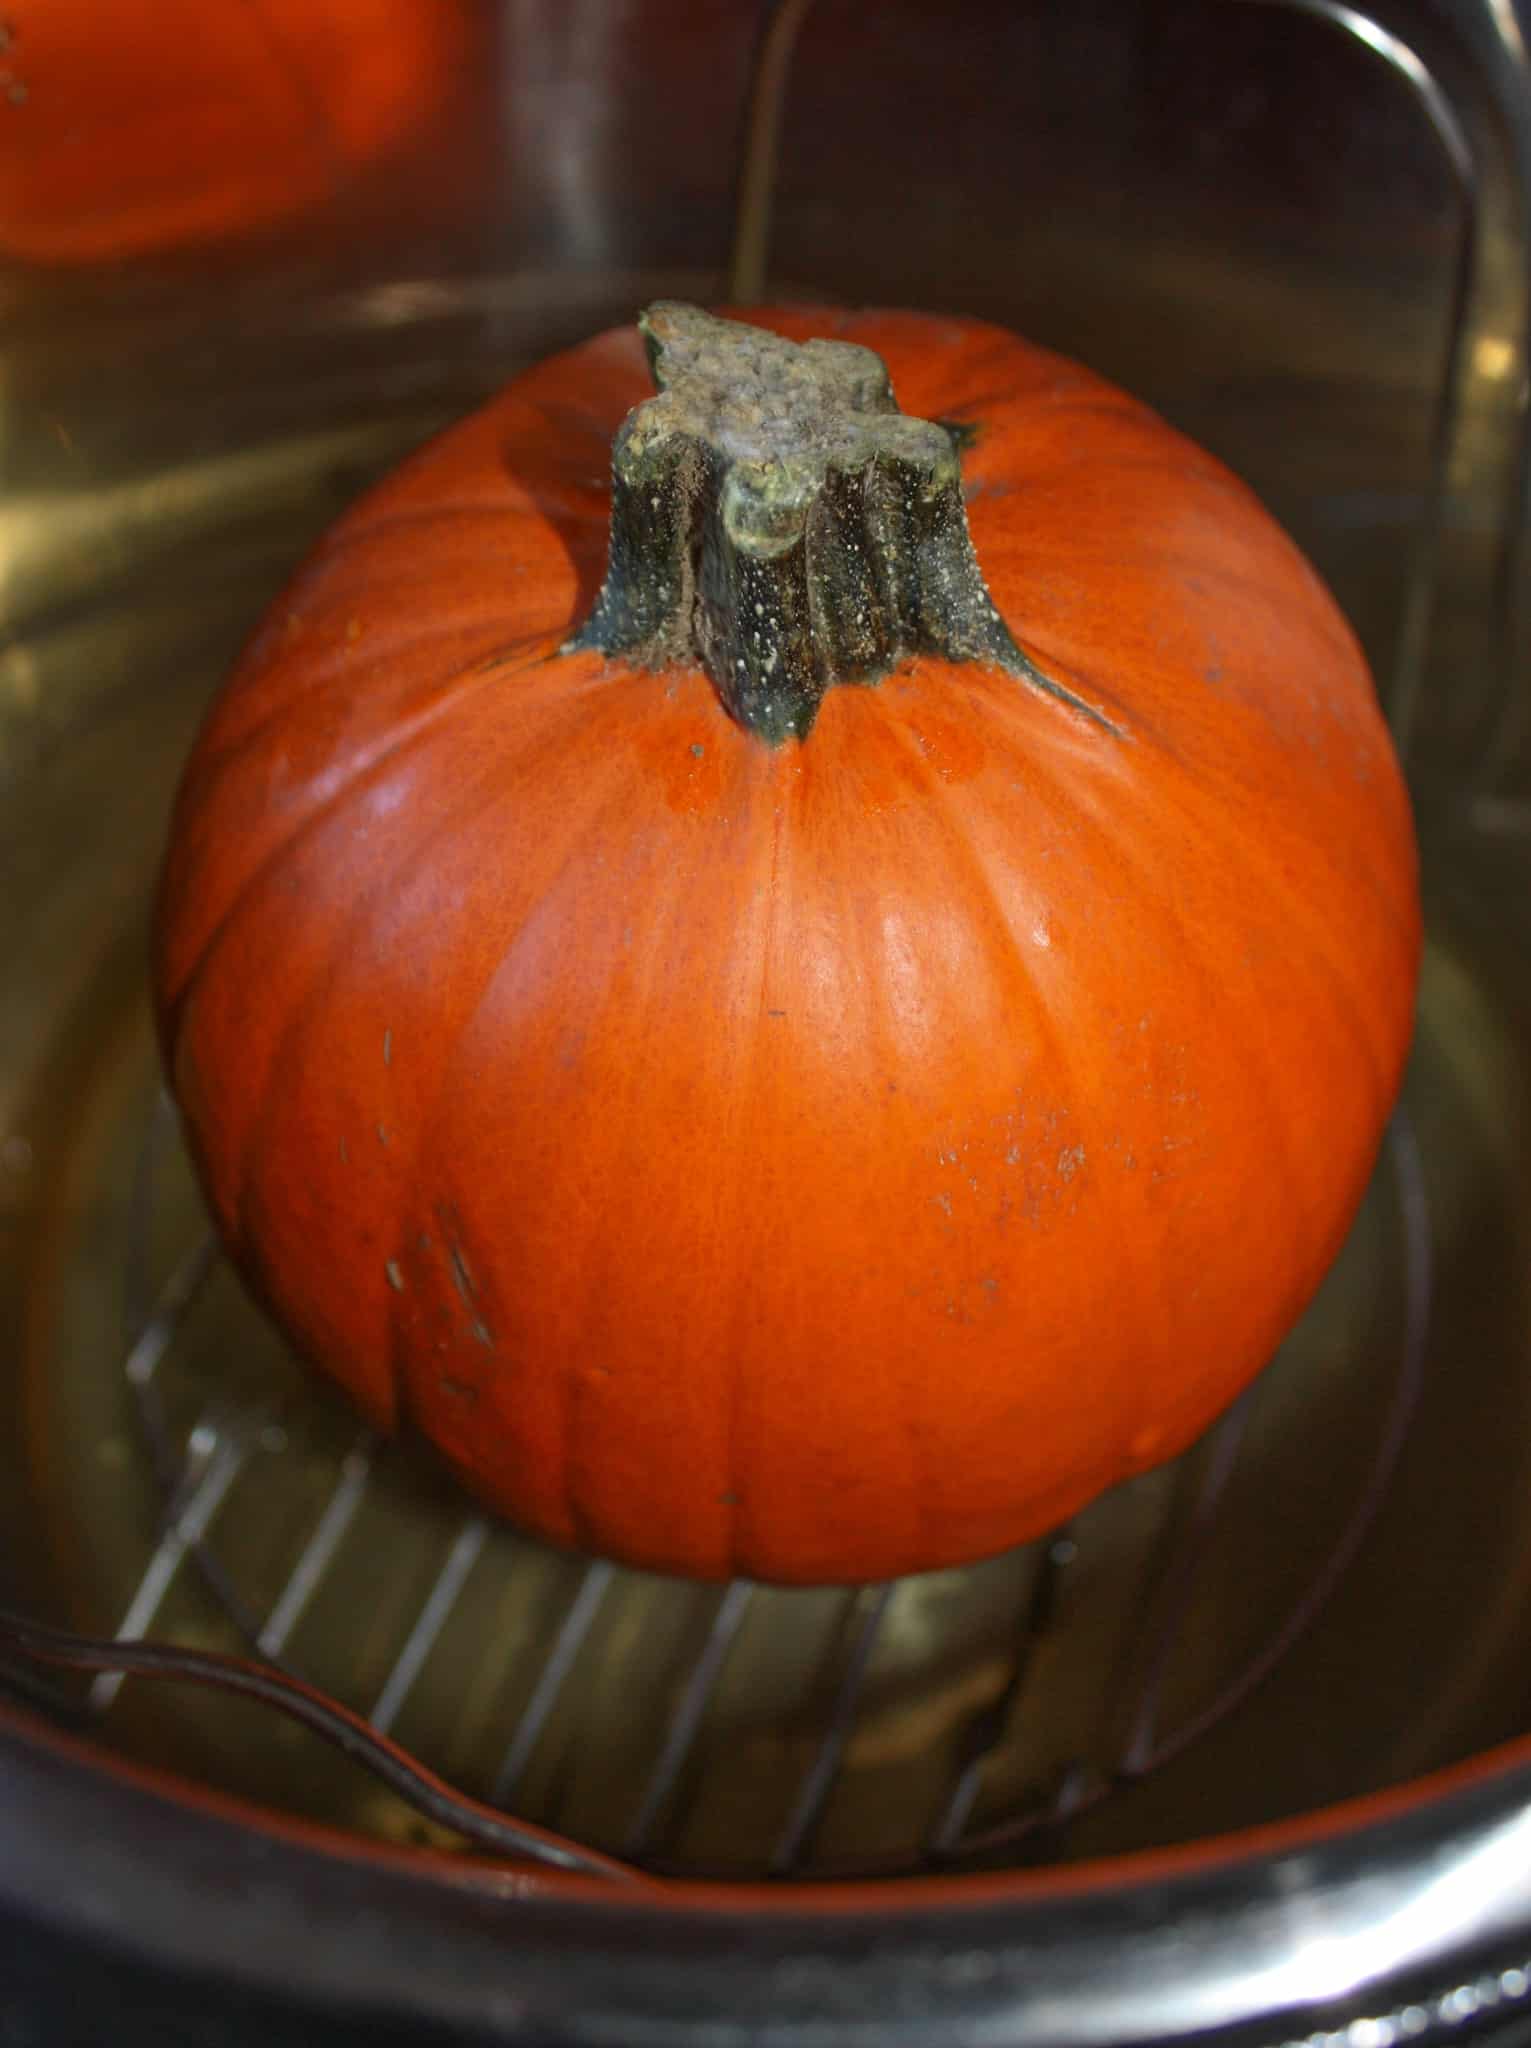 Putting the pie pumpkin in the Instant Pot.